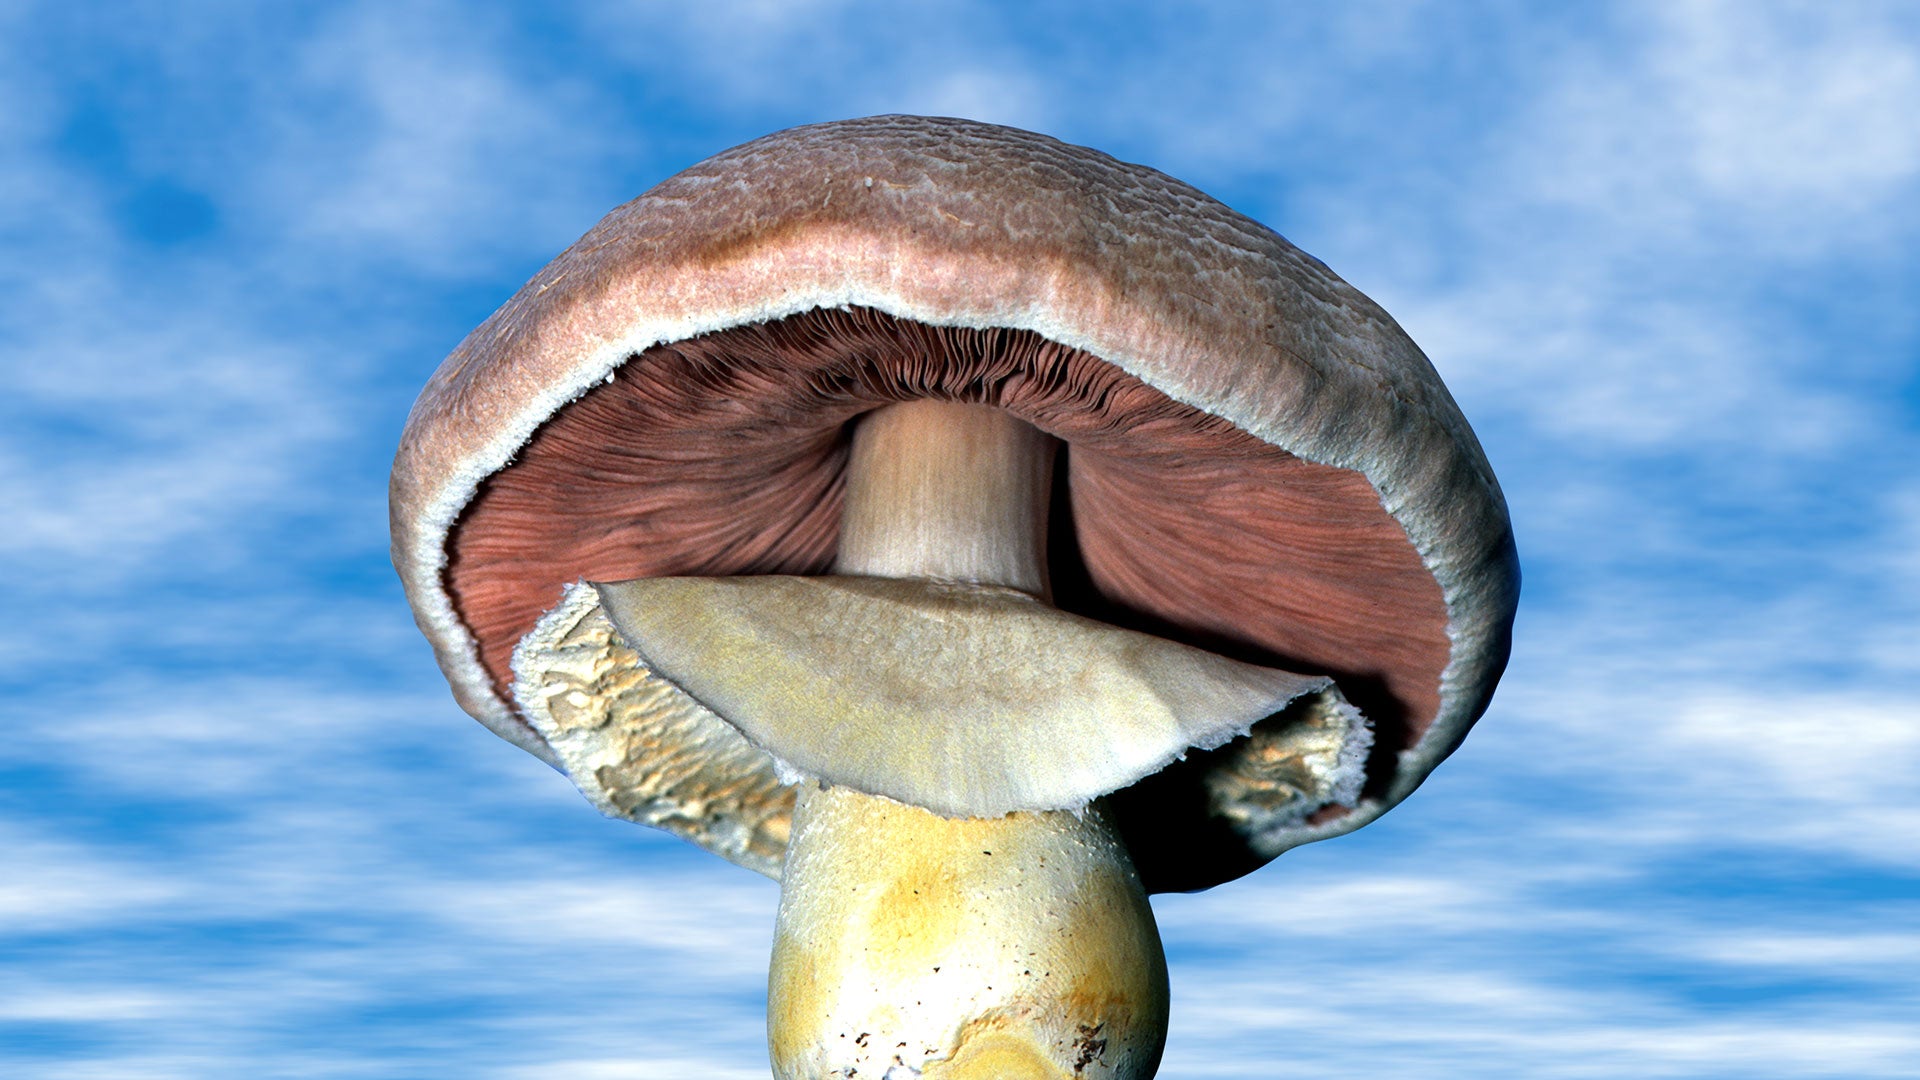 Should You Consume Raw Mushrooms?